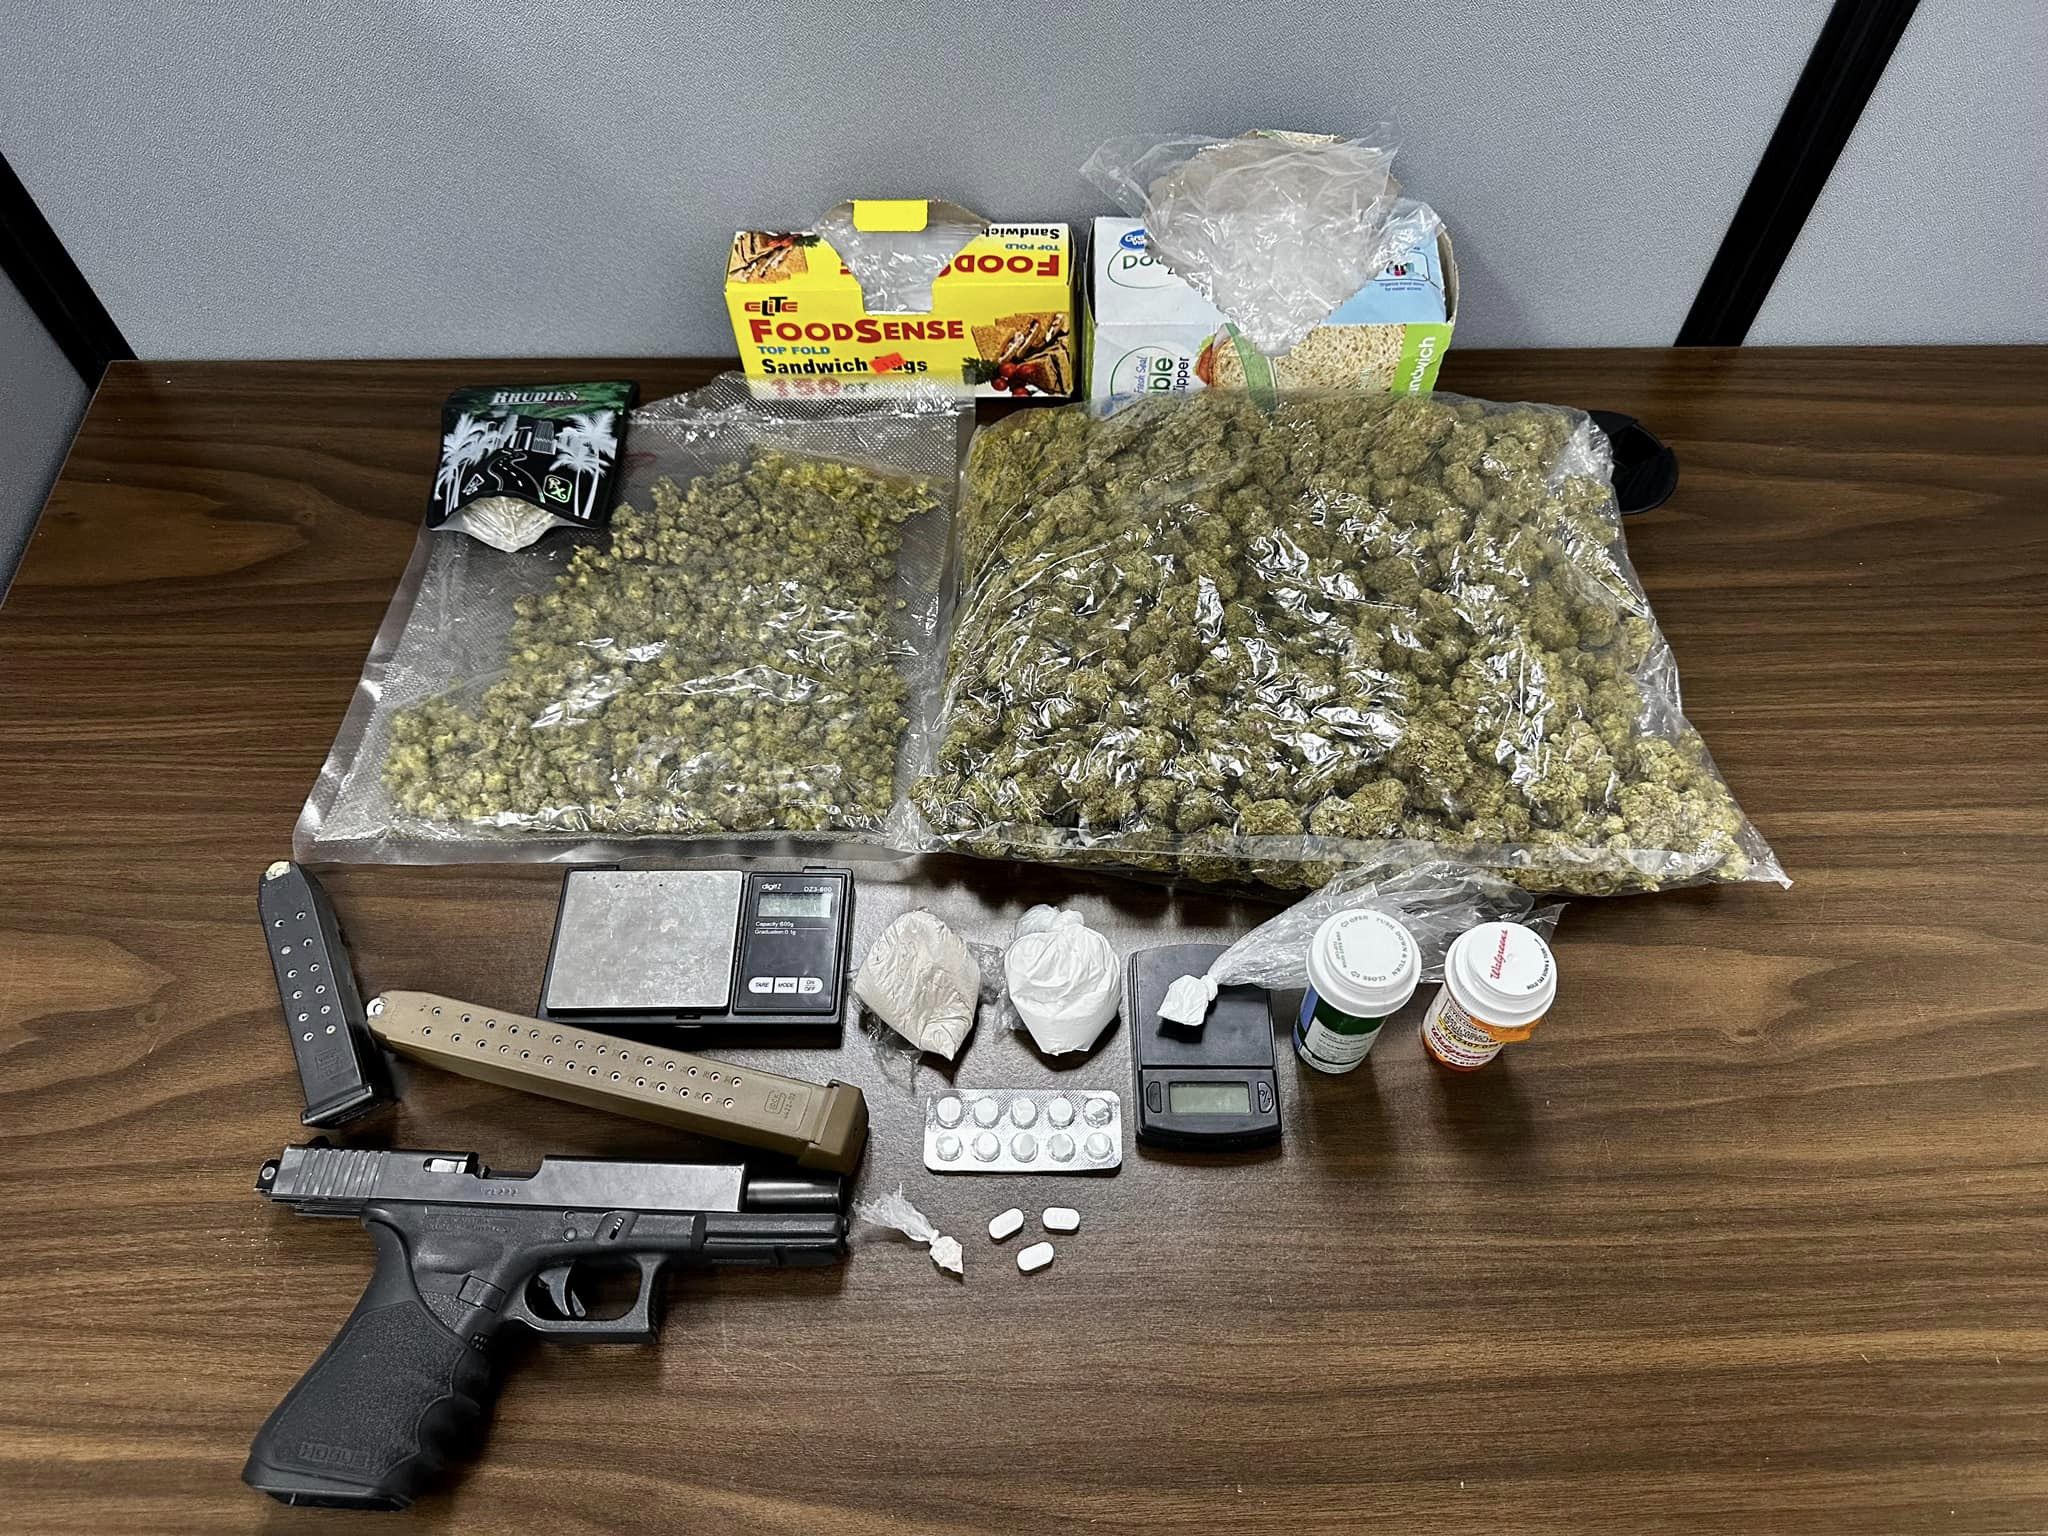 SBSO ARRESTS MAN ON VARIOUS NARCOTICS, WEAPONS CHARGES